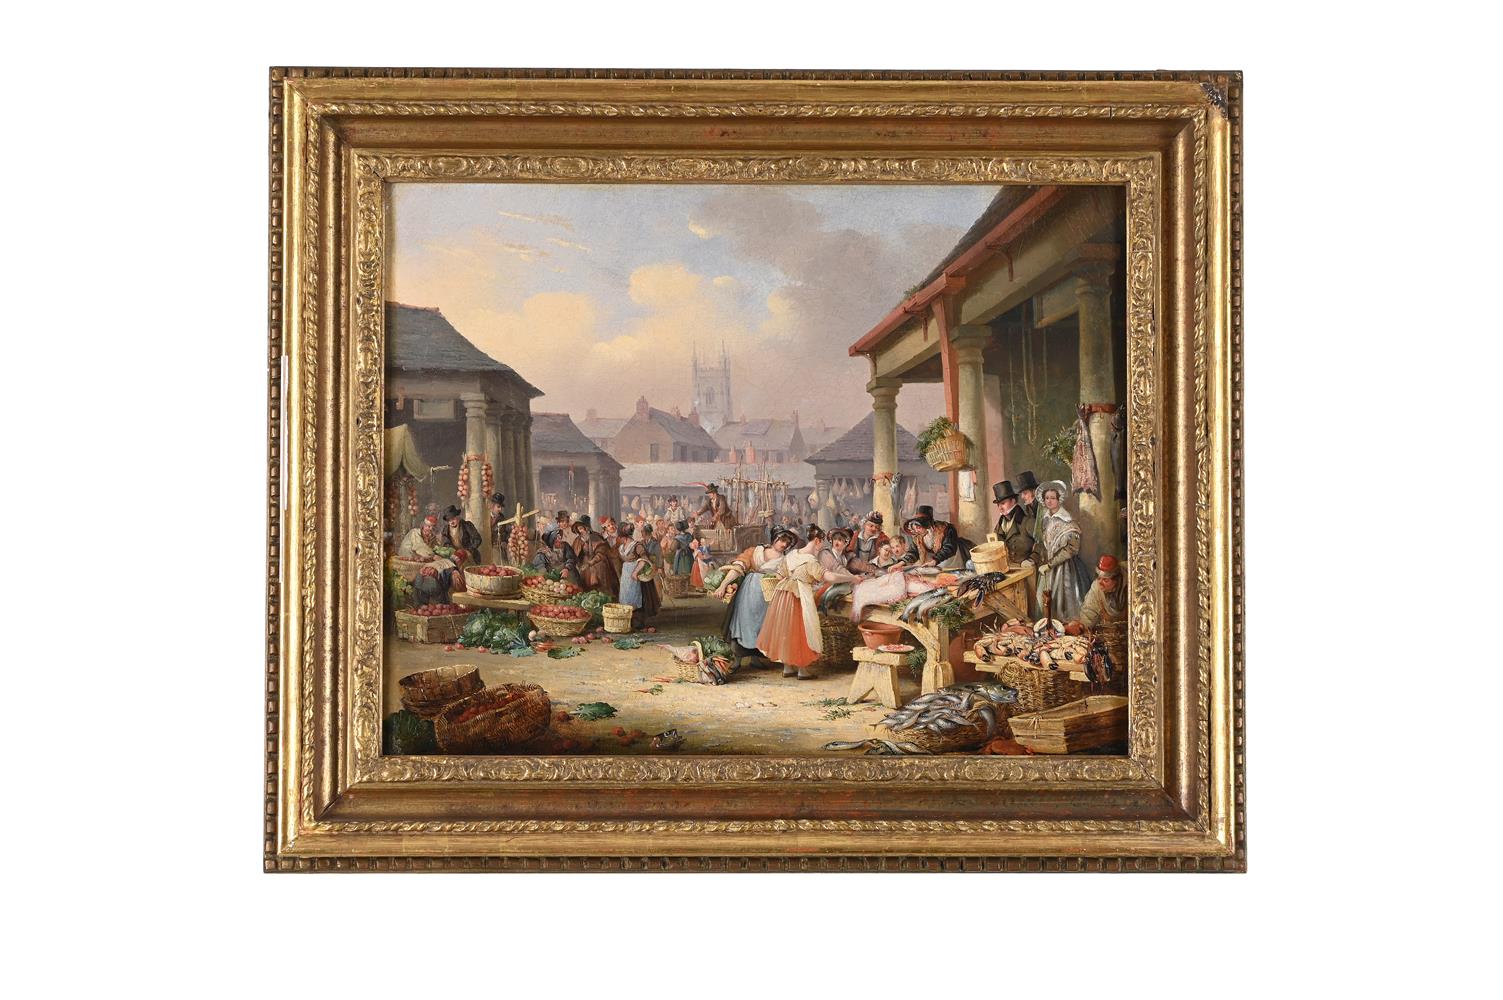 NICHOLAS CONDY (BRITISH 1793-1857), FIGURES IN A MARKET (TRADITIONALLY IDENTIFIED AS BOROUGH MARKET) - Image 2 of 3